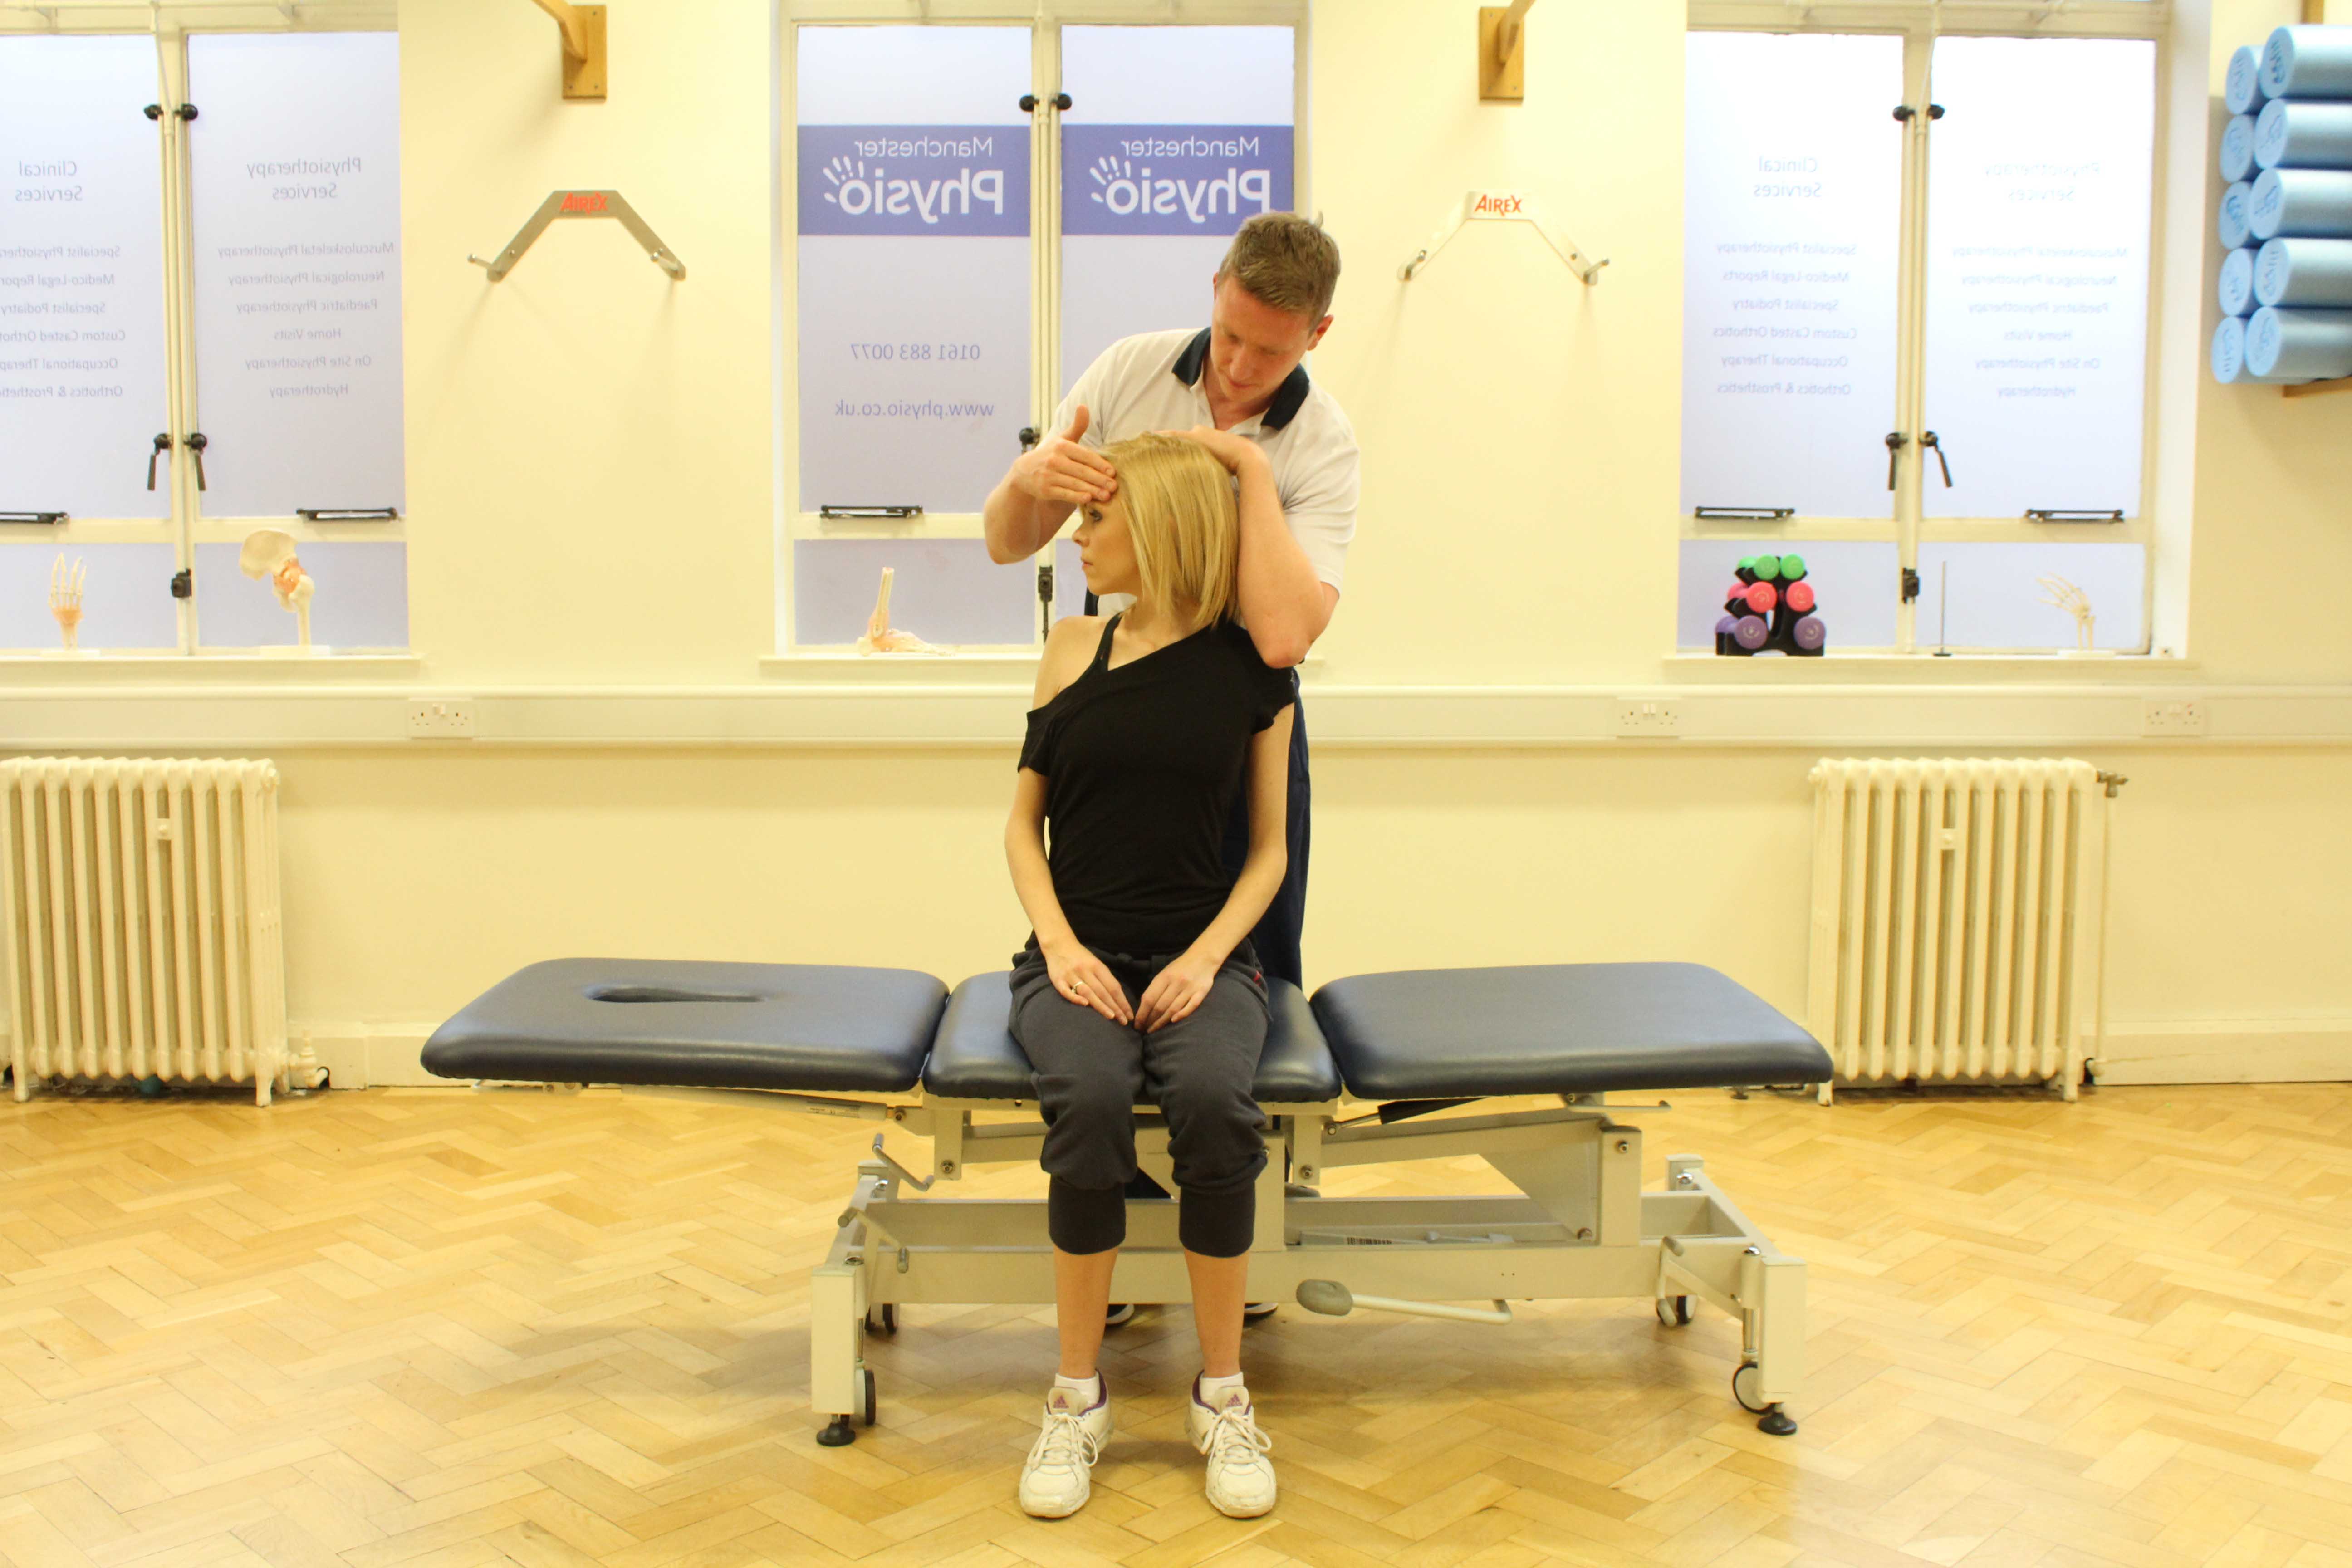 Experienced Physiotherapist conducting an assessment of the cervical spine, muscles and connective tissues in the neck